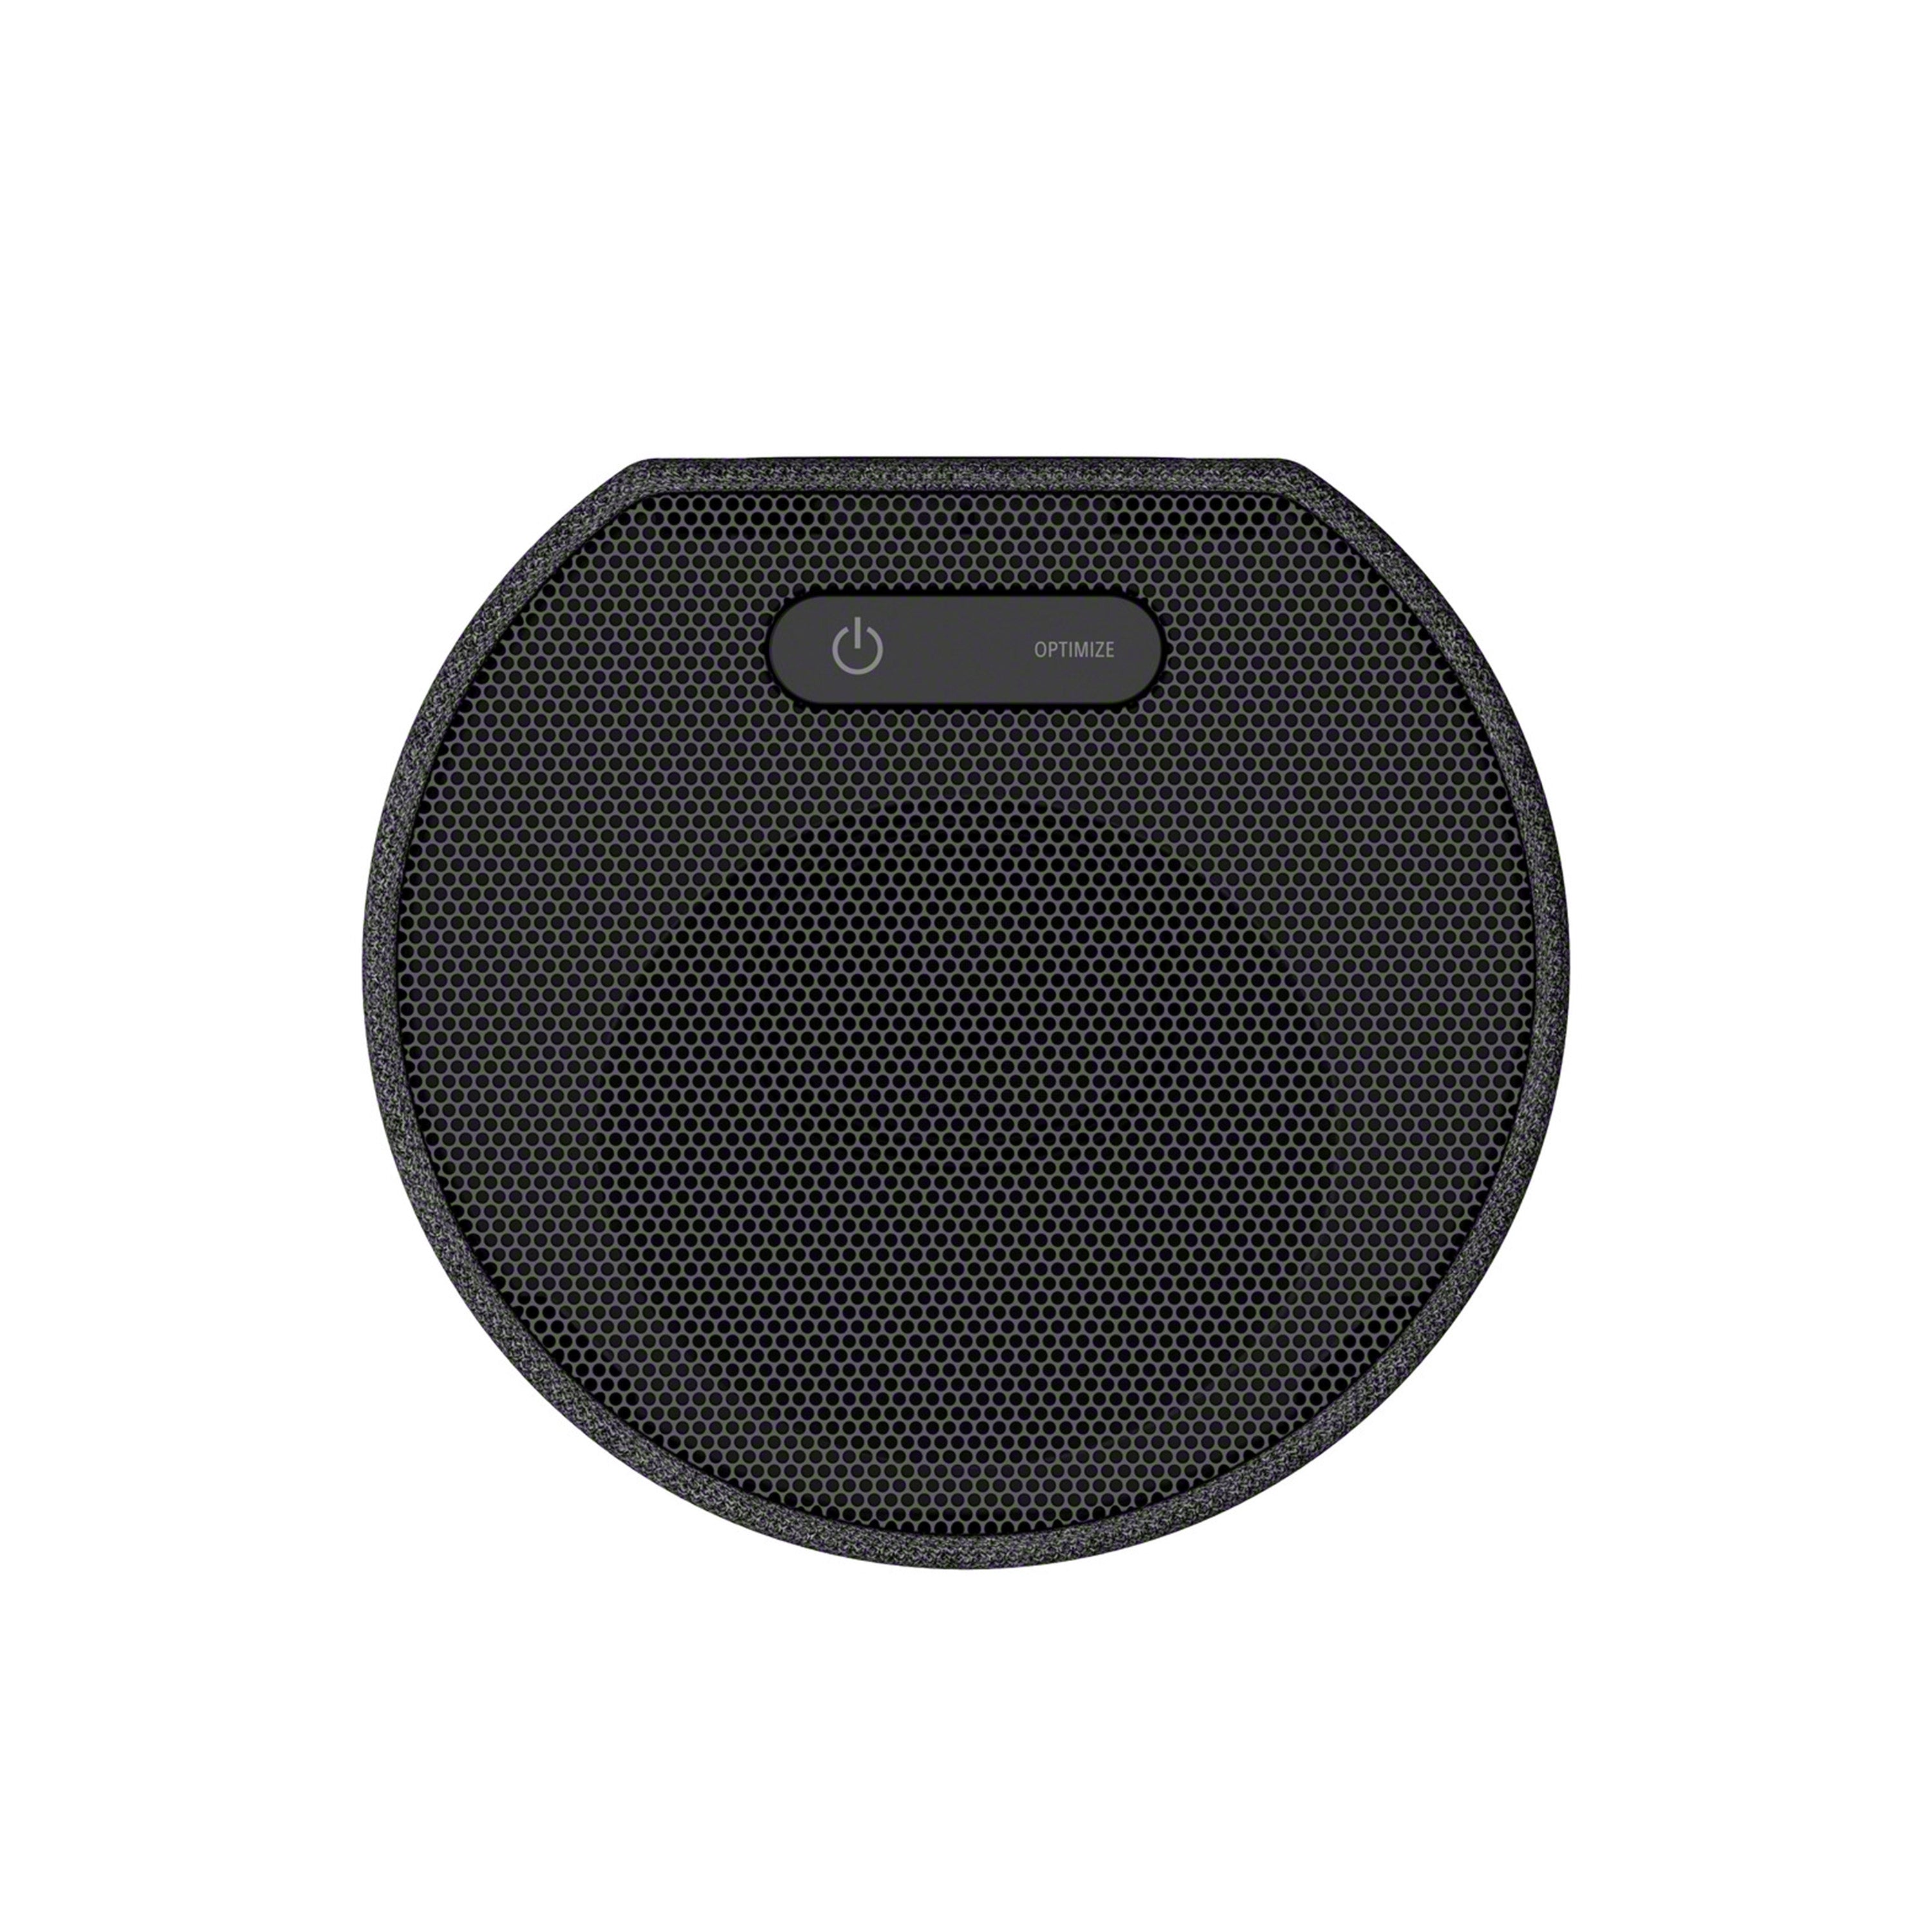 SA-RS5 Wireless Rear Speakers with Built-in Battery for HT-A7000